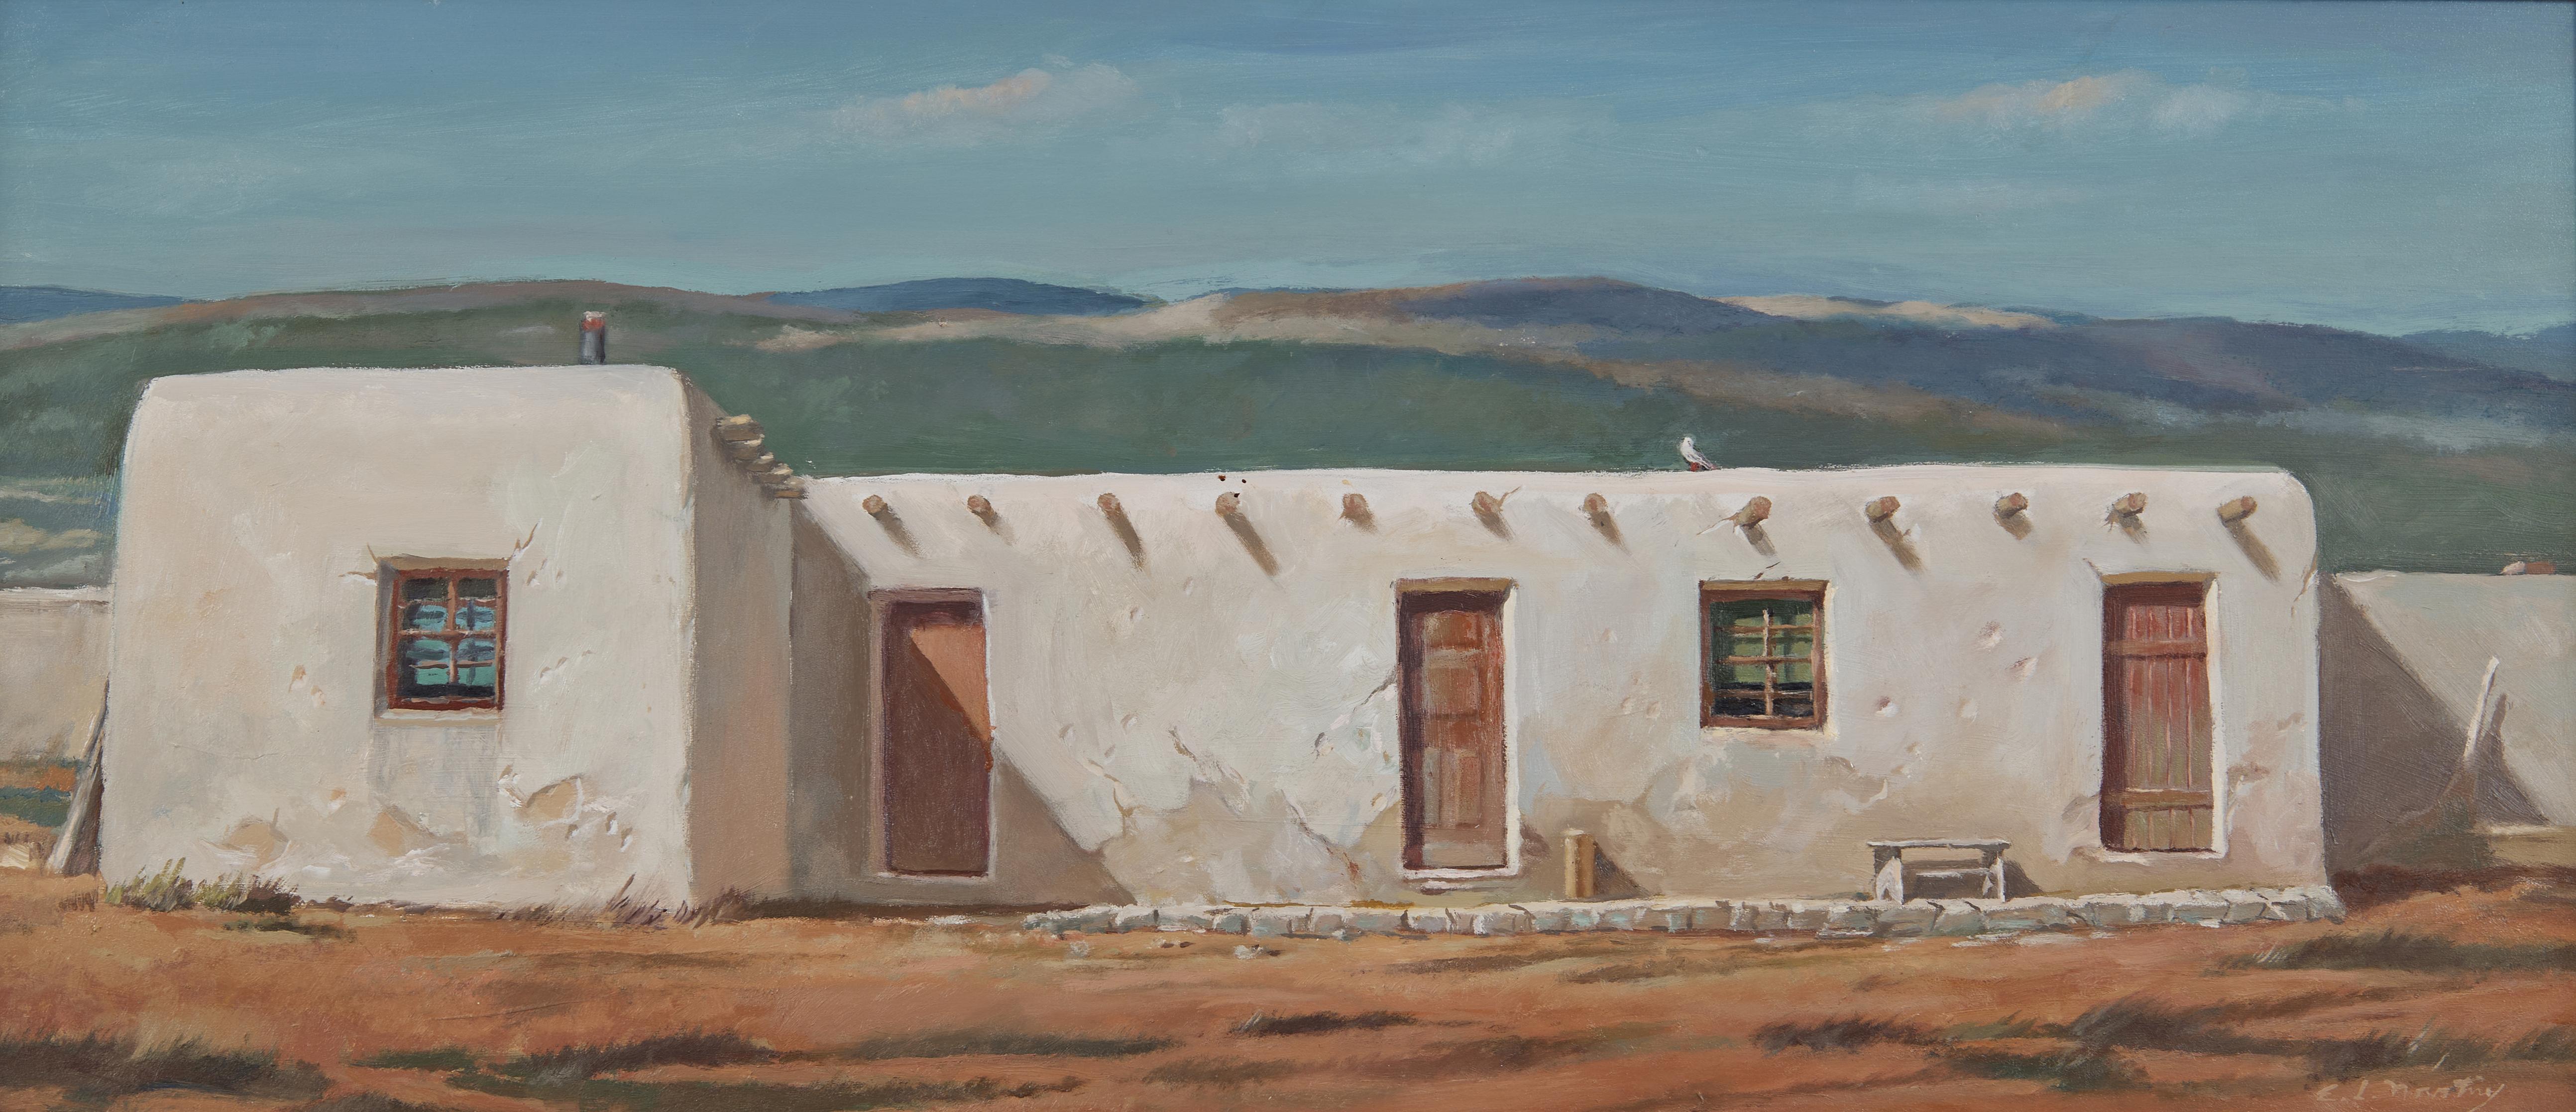 Elmer Ladislaw Novotny (American, 1909-1997)
Sante Fe Home, New Mexico
Oil on board
Signed lower right, signed and titled verso
12.5 x 29.5 inches
18 x 34 inches, framed

Elmer Novotny, born in 1909, was a long-time resident of Ohio, teacher at Kent